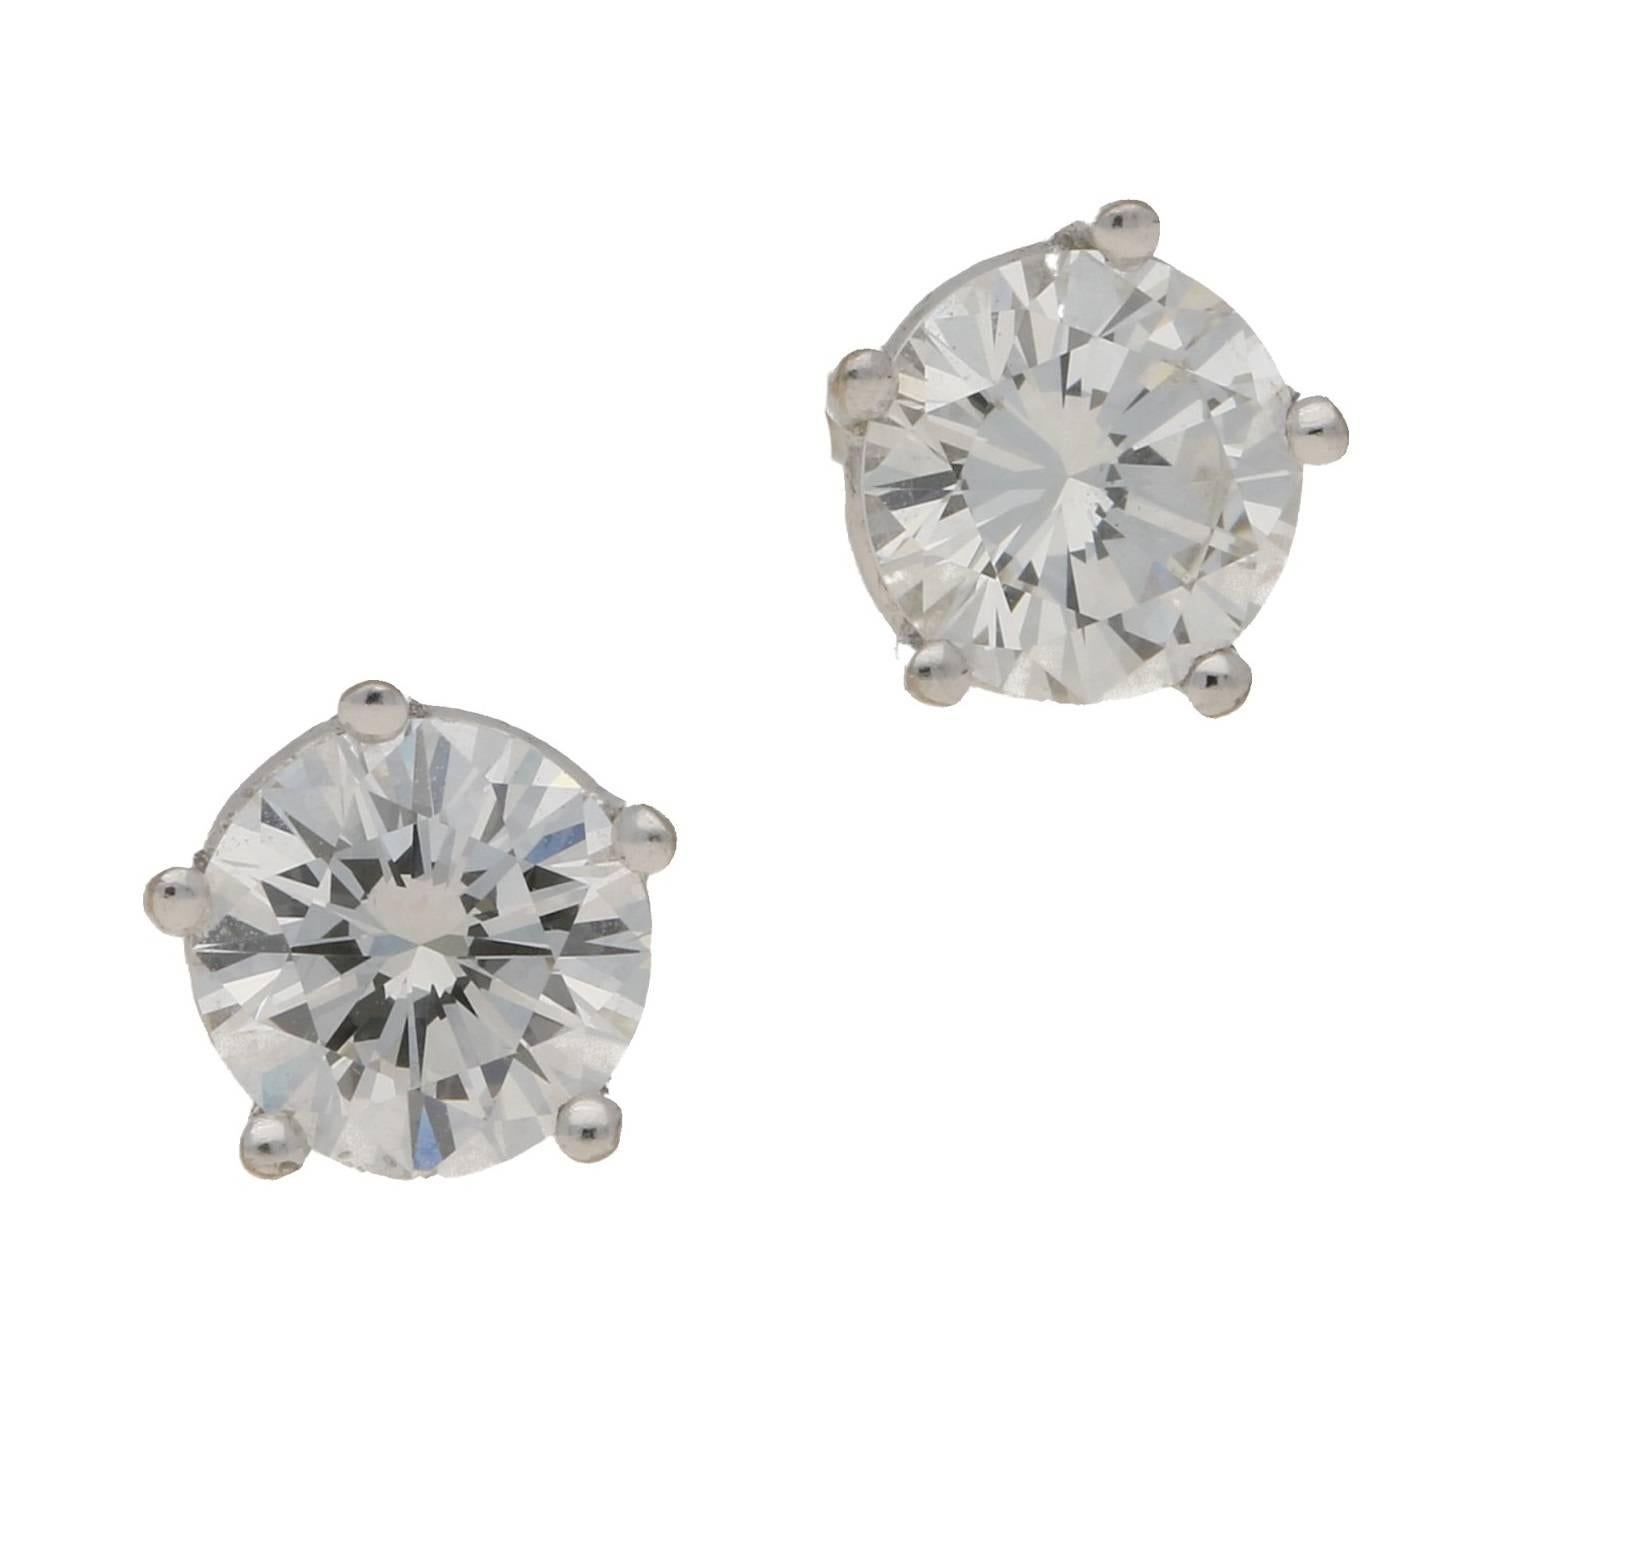 A stunning pair of diamond ear-studs set in 18ct white gold.  Each round brilliant cut diamond is set in four claw 18ct white gold. Estimated total diamond weight 1.70cts. Assessed diamond colour: H. Assessed diamond clarity: VVS2